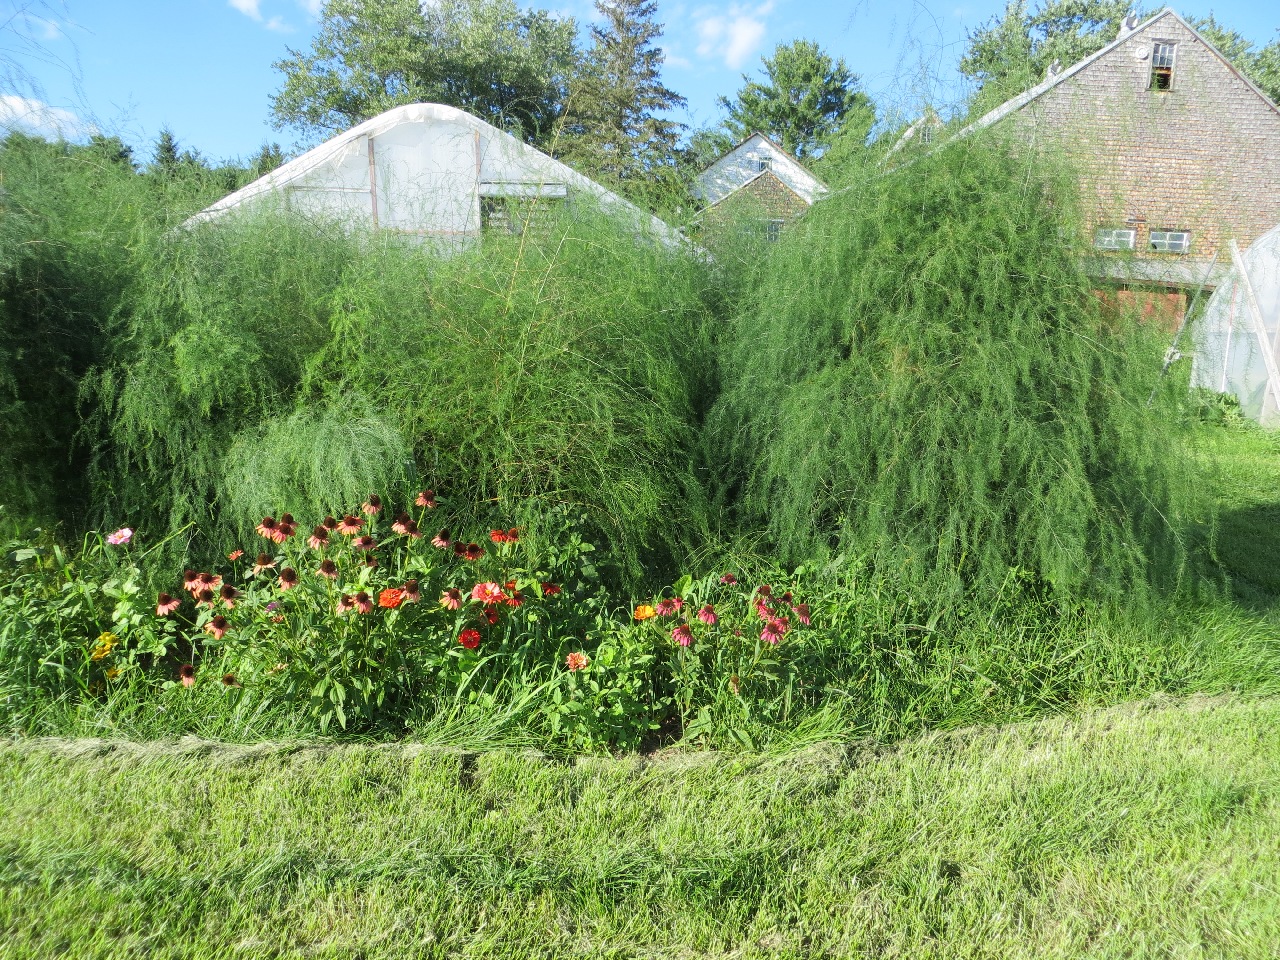 Asparagus in the off-season: a seven-foot-tall mass of feathery green fronds. In front, clusters of red and purple coneflowers. In the back you can see the peaks of a greenhouse, the barn, and the farmhouse.